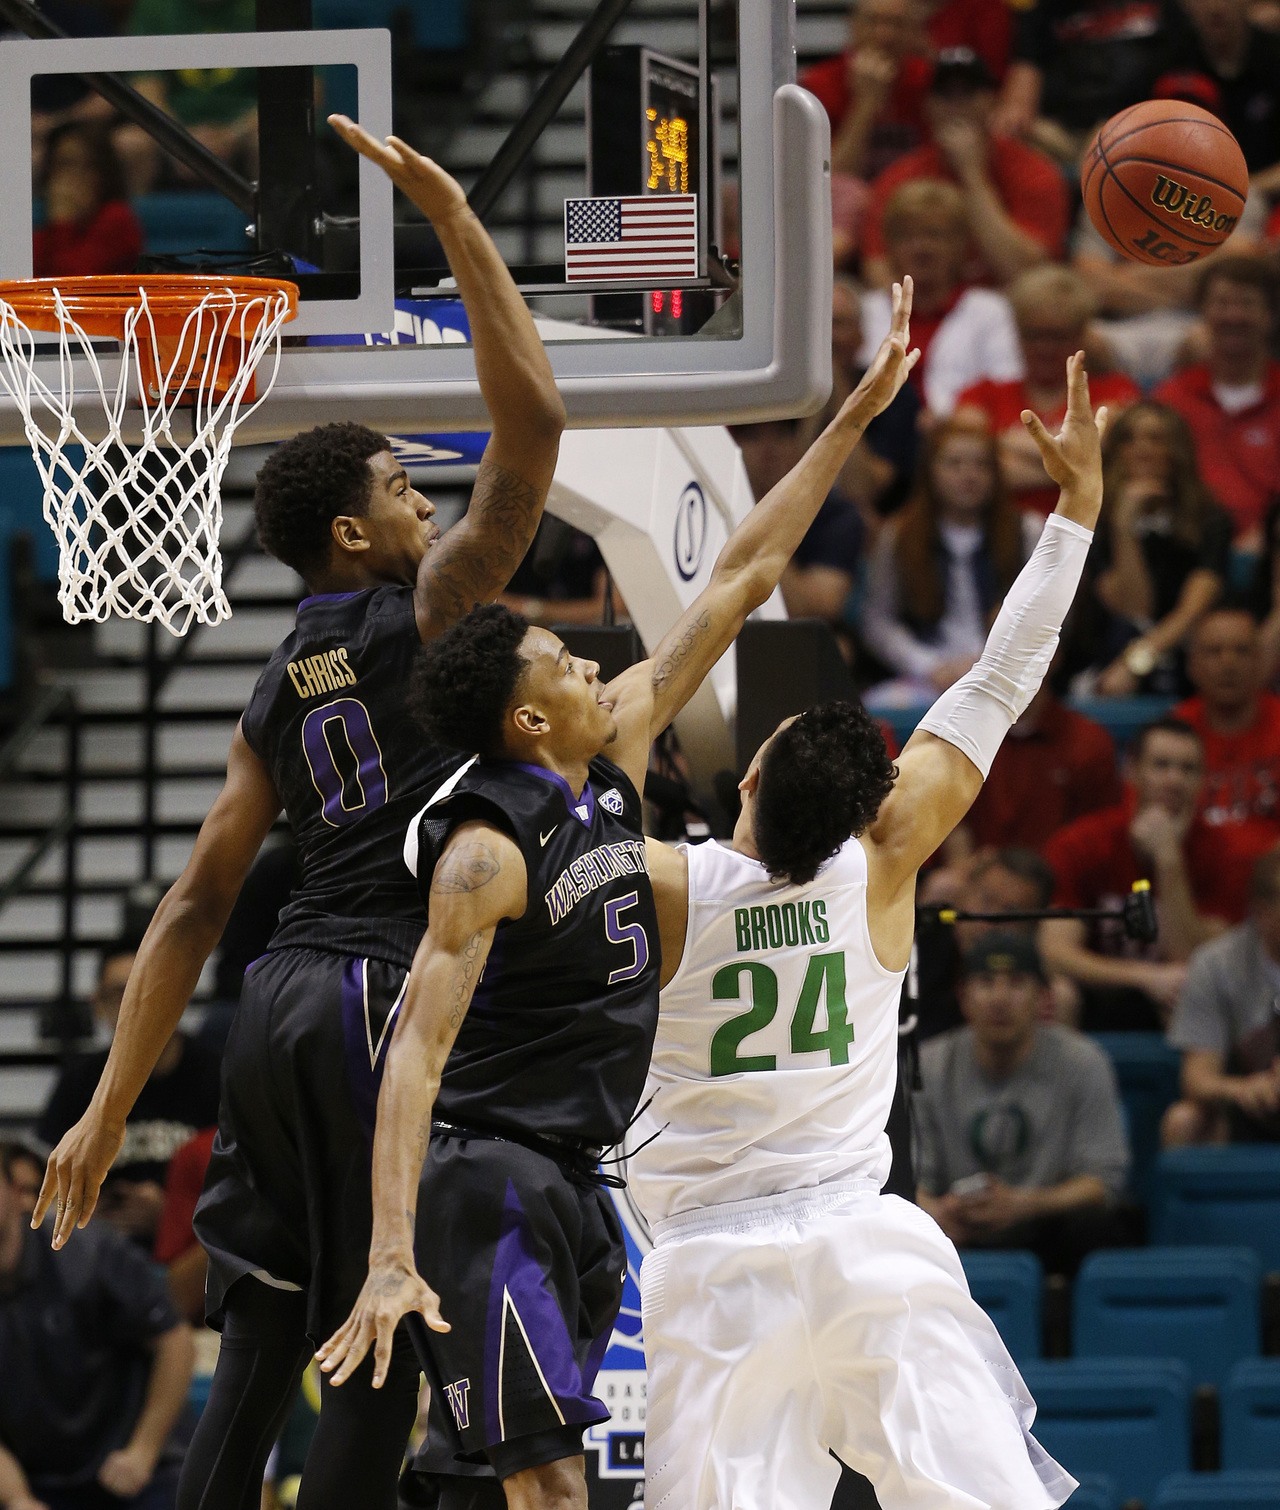 Oregon forward Dillon Brooks (right) shoots against Washington guard Dejounte Murray (5) and Washington forward Marquese Chriss (0) during the first half of a game in the quarterfinal round of the Pac-12 men’s tournament on Thursday in Las Vegas.